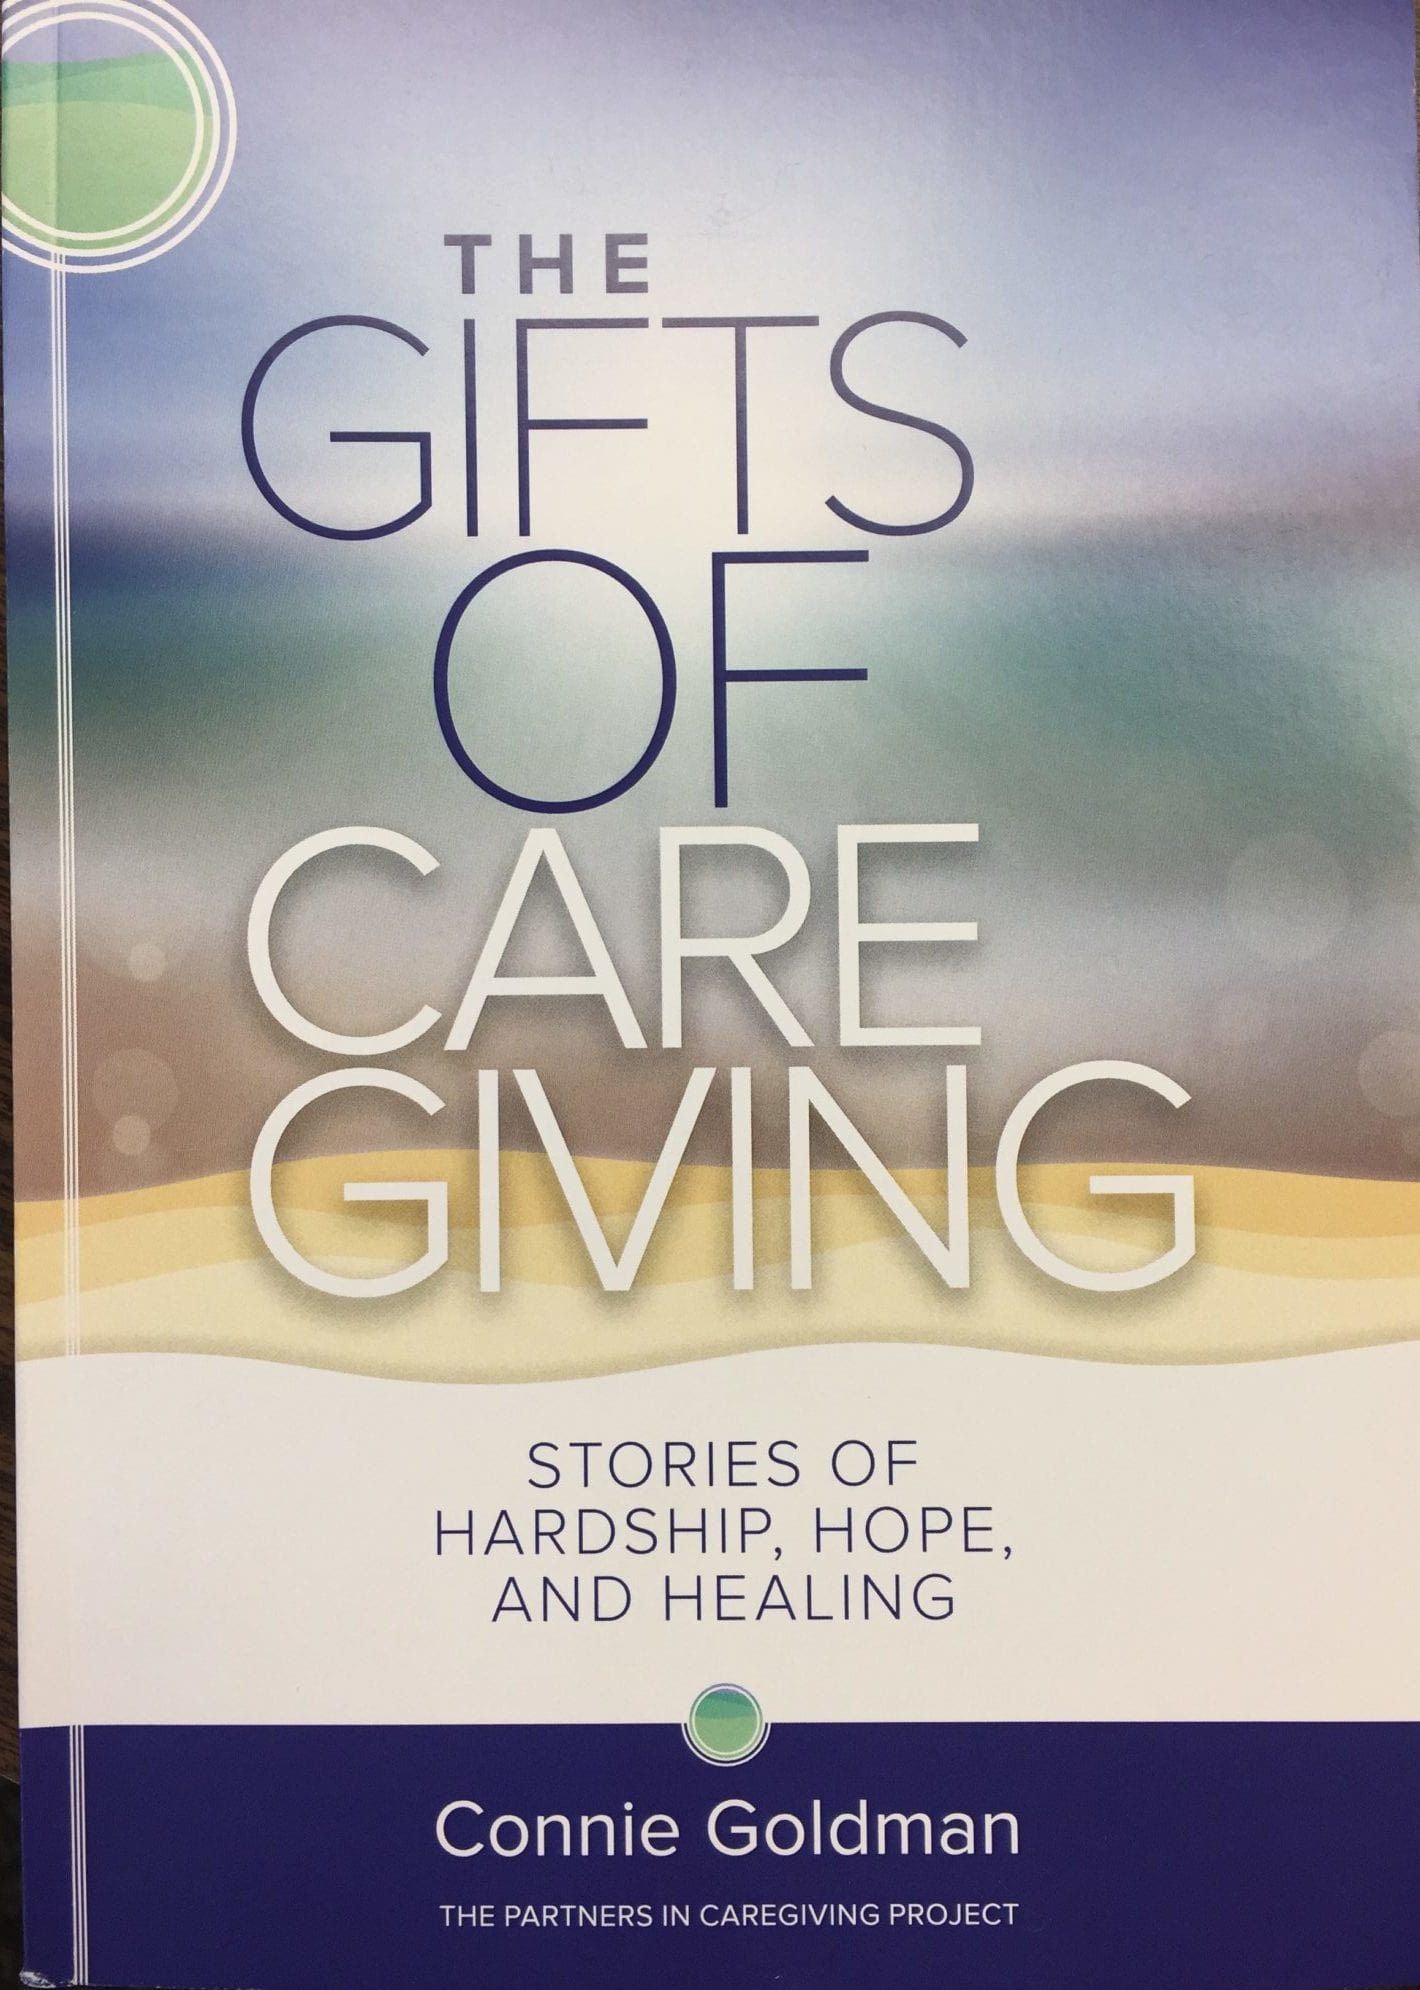 Dr. Battisti shares his story of caregiving in recent book